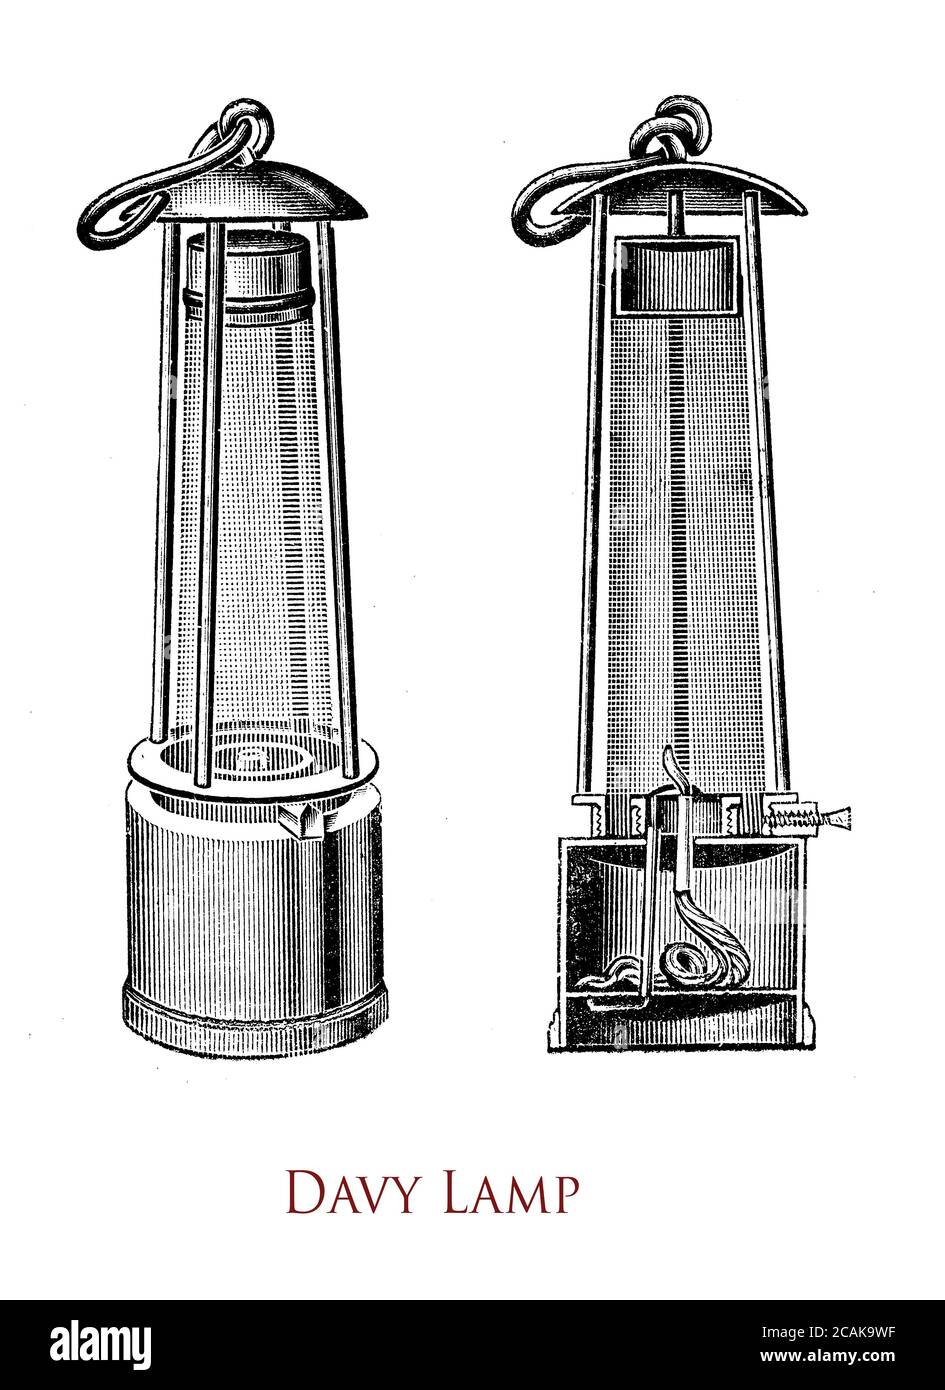 Davy lamp is a safety lamp for use in flammable atmospheres like coal  mines, invented in 1815 by Sir Humphry Davy. It consists of a wick lamp  with the flame produced by